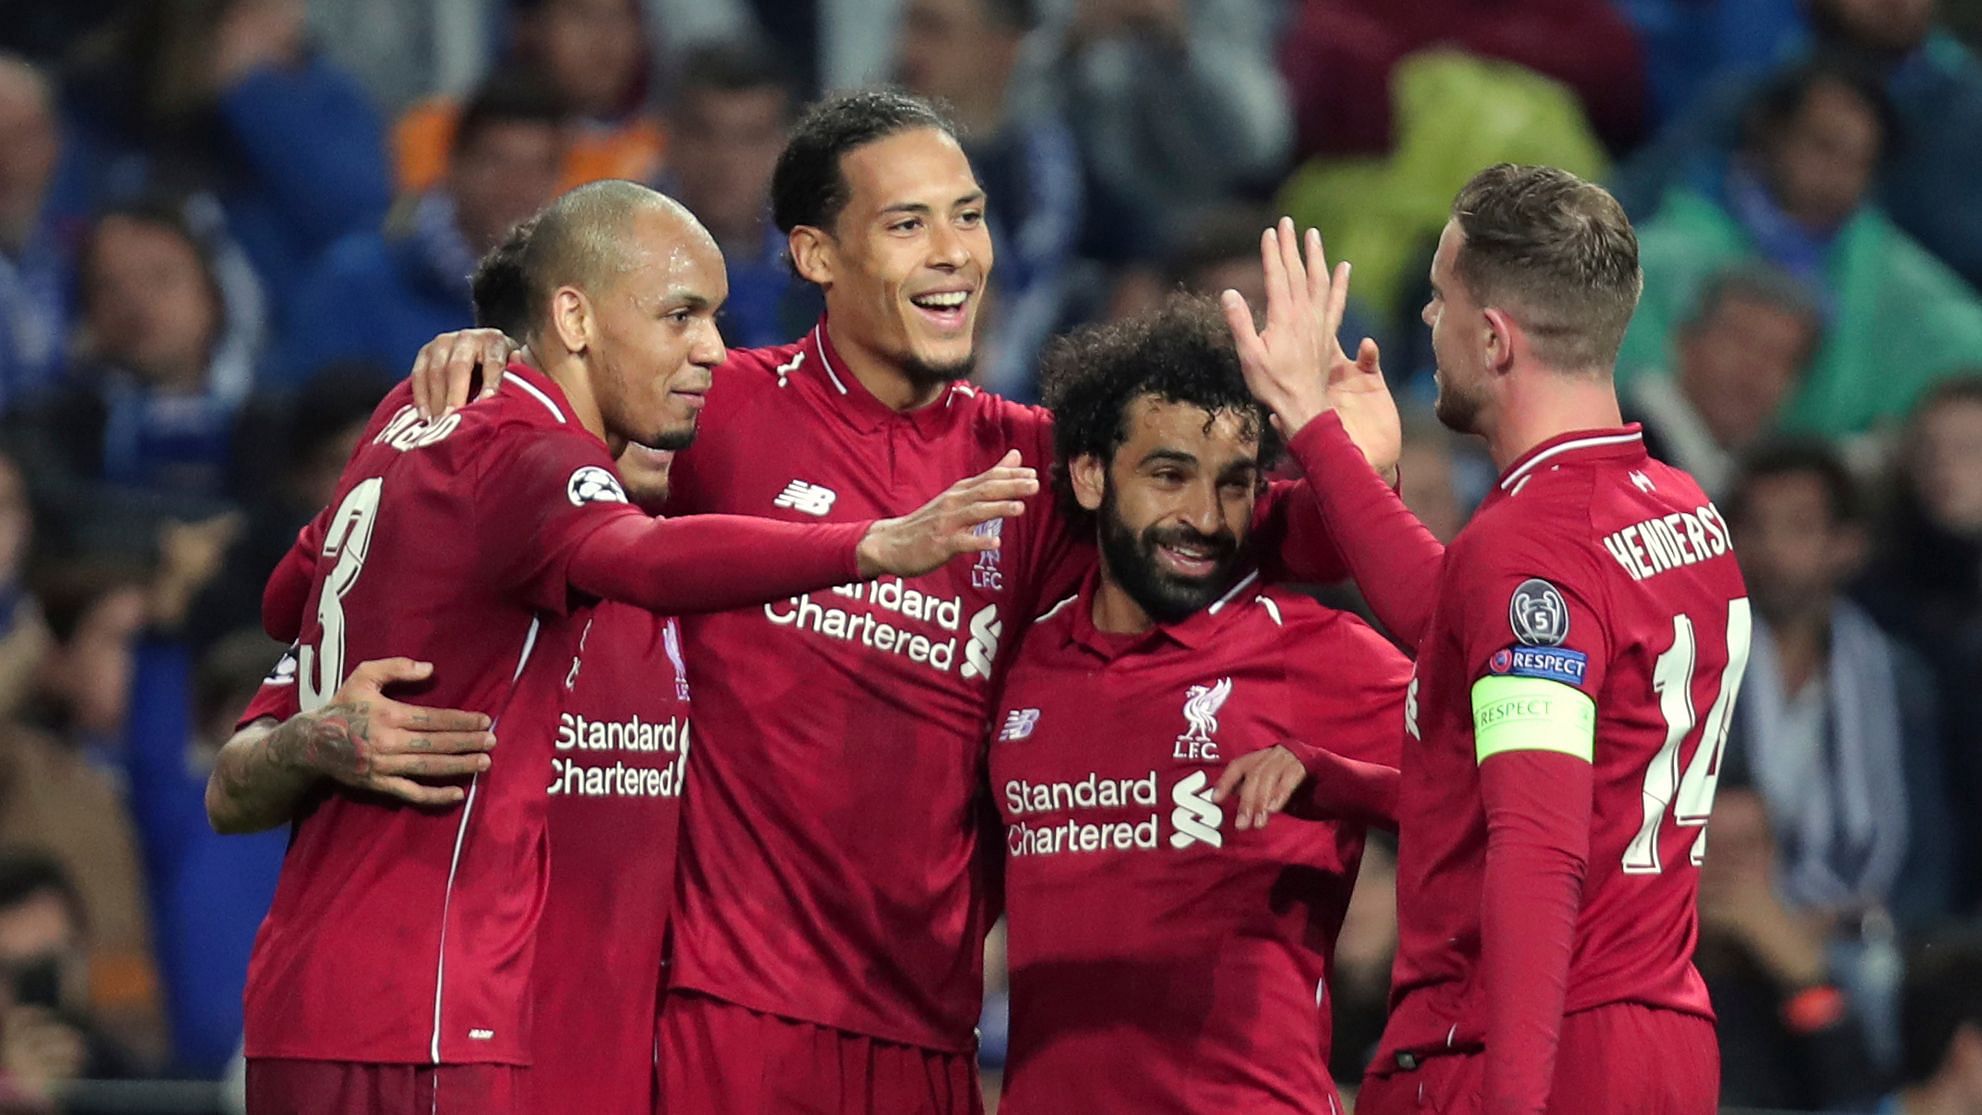 Liverpool’s Virgil van Dijk celebrates with teammates after scoring his side’s fourth goal during the Champions League quarterfinals, 2nd leg, soccer match between FC Porto and Liverpool at the Dragao stadium in Porto, Portugal, Wednesday, April 17, 2019.&nbsp;